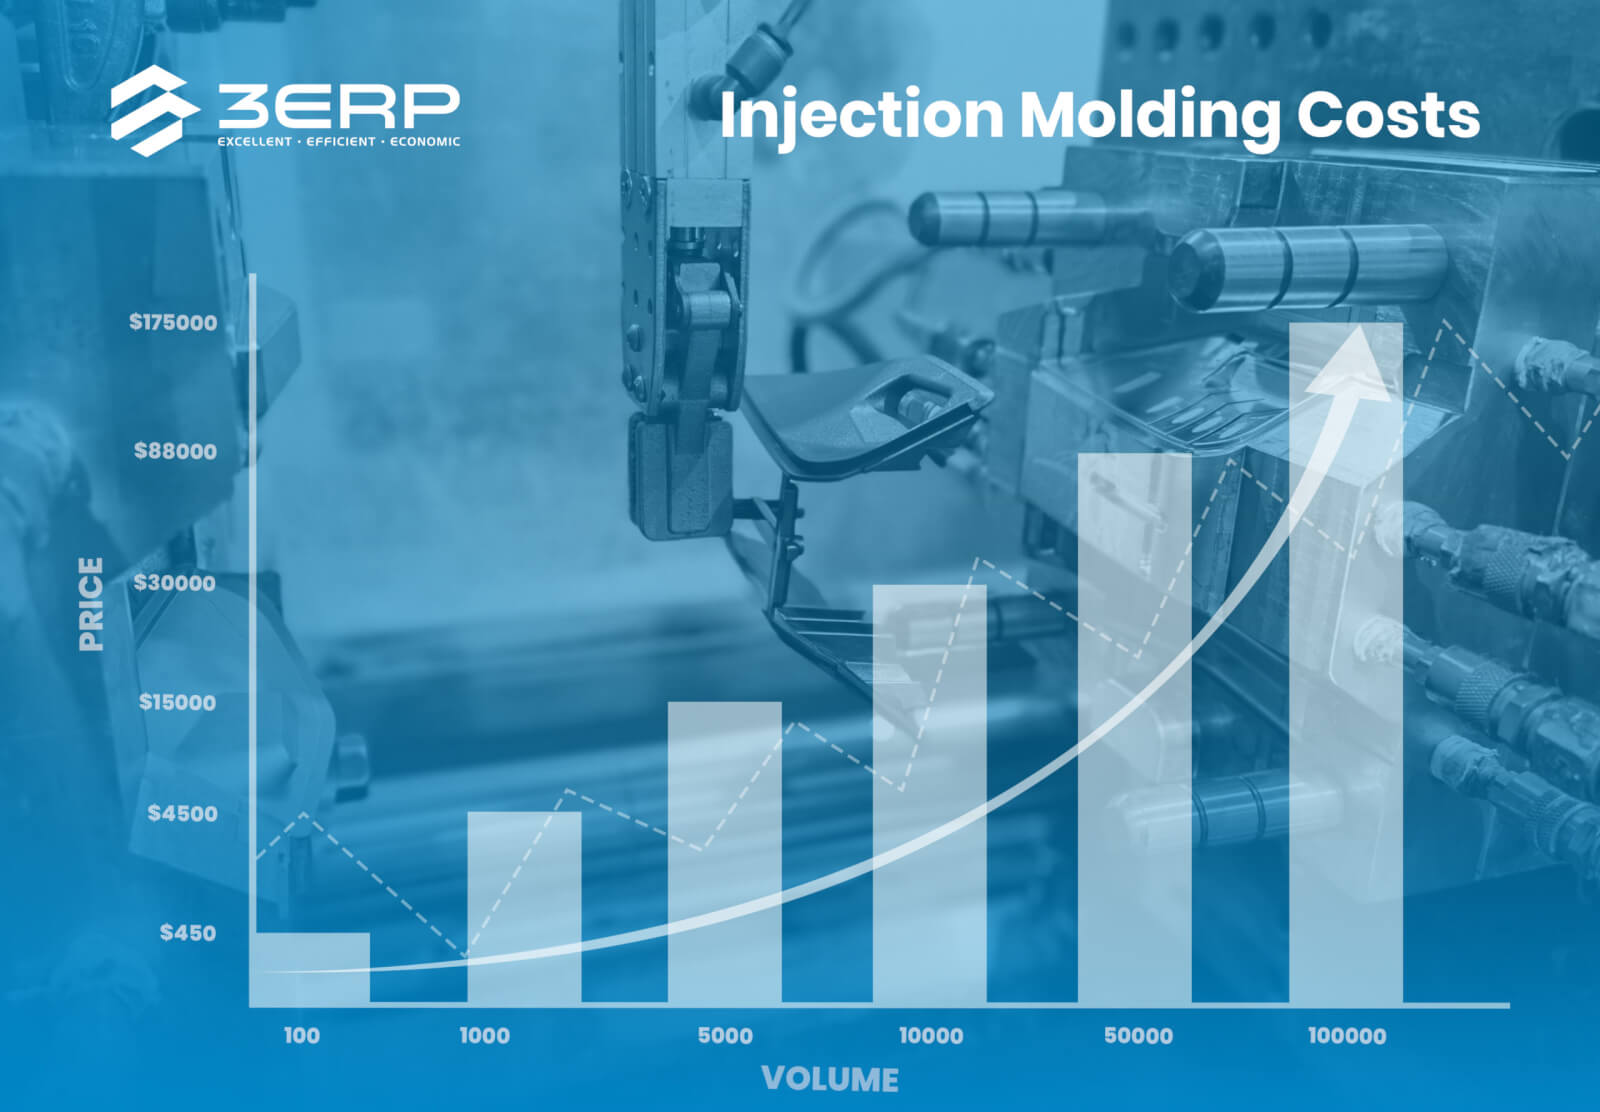 How Much Do Injection Molding Costs and How to Estimate It?